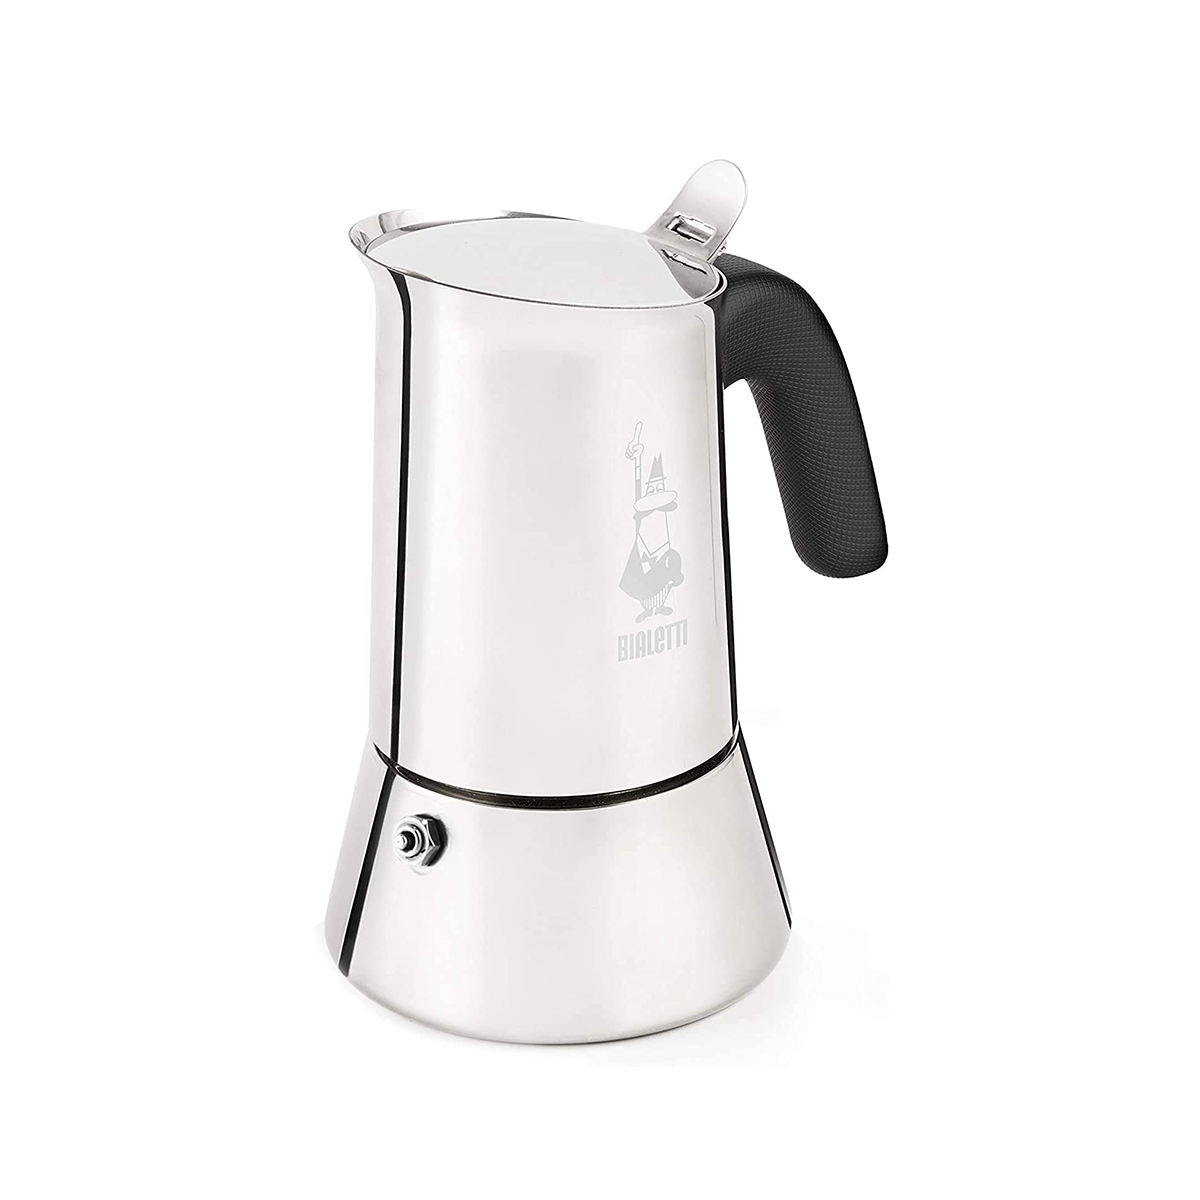 https://www.redberus.shop/wp-content/uploads/1692/43/looking-for-a-bialetti-venus-induction-r-stainless-steel-stovetop-coffee-maker-6-cup-silver-bialetti-to-purchase-be-quick_2.png